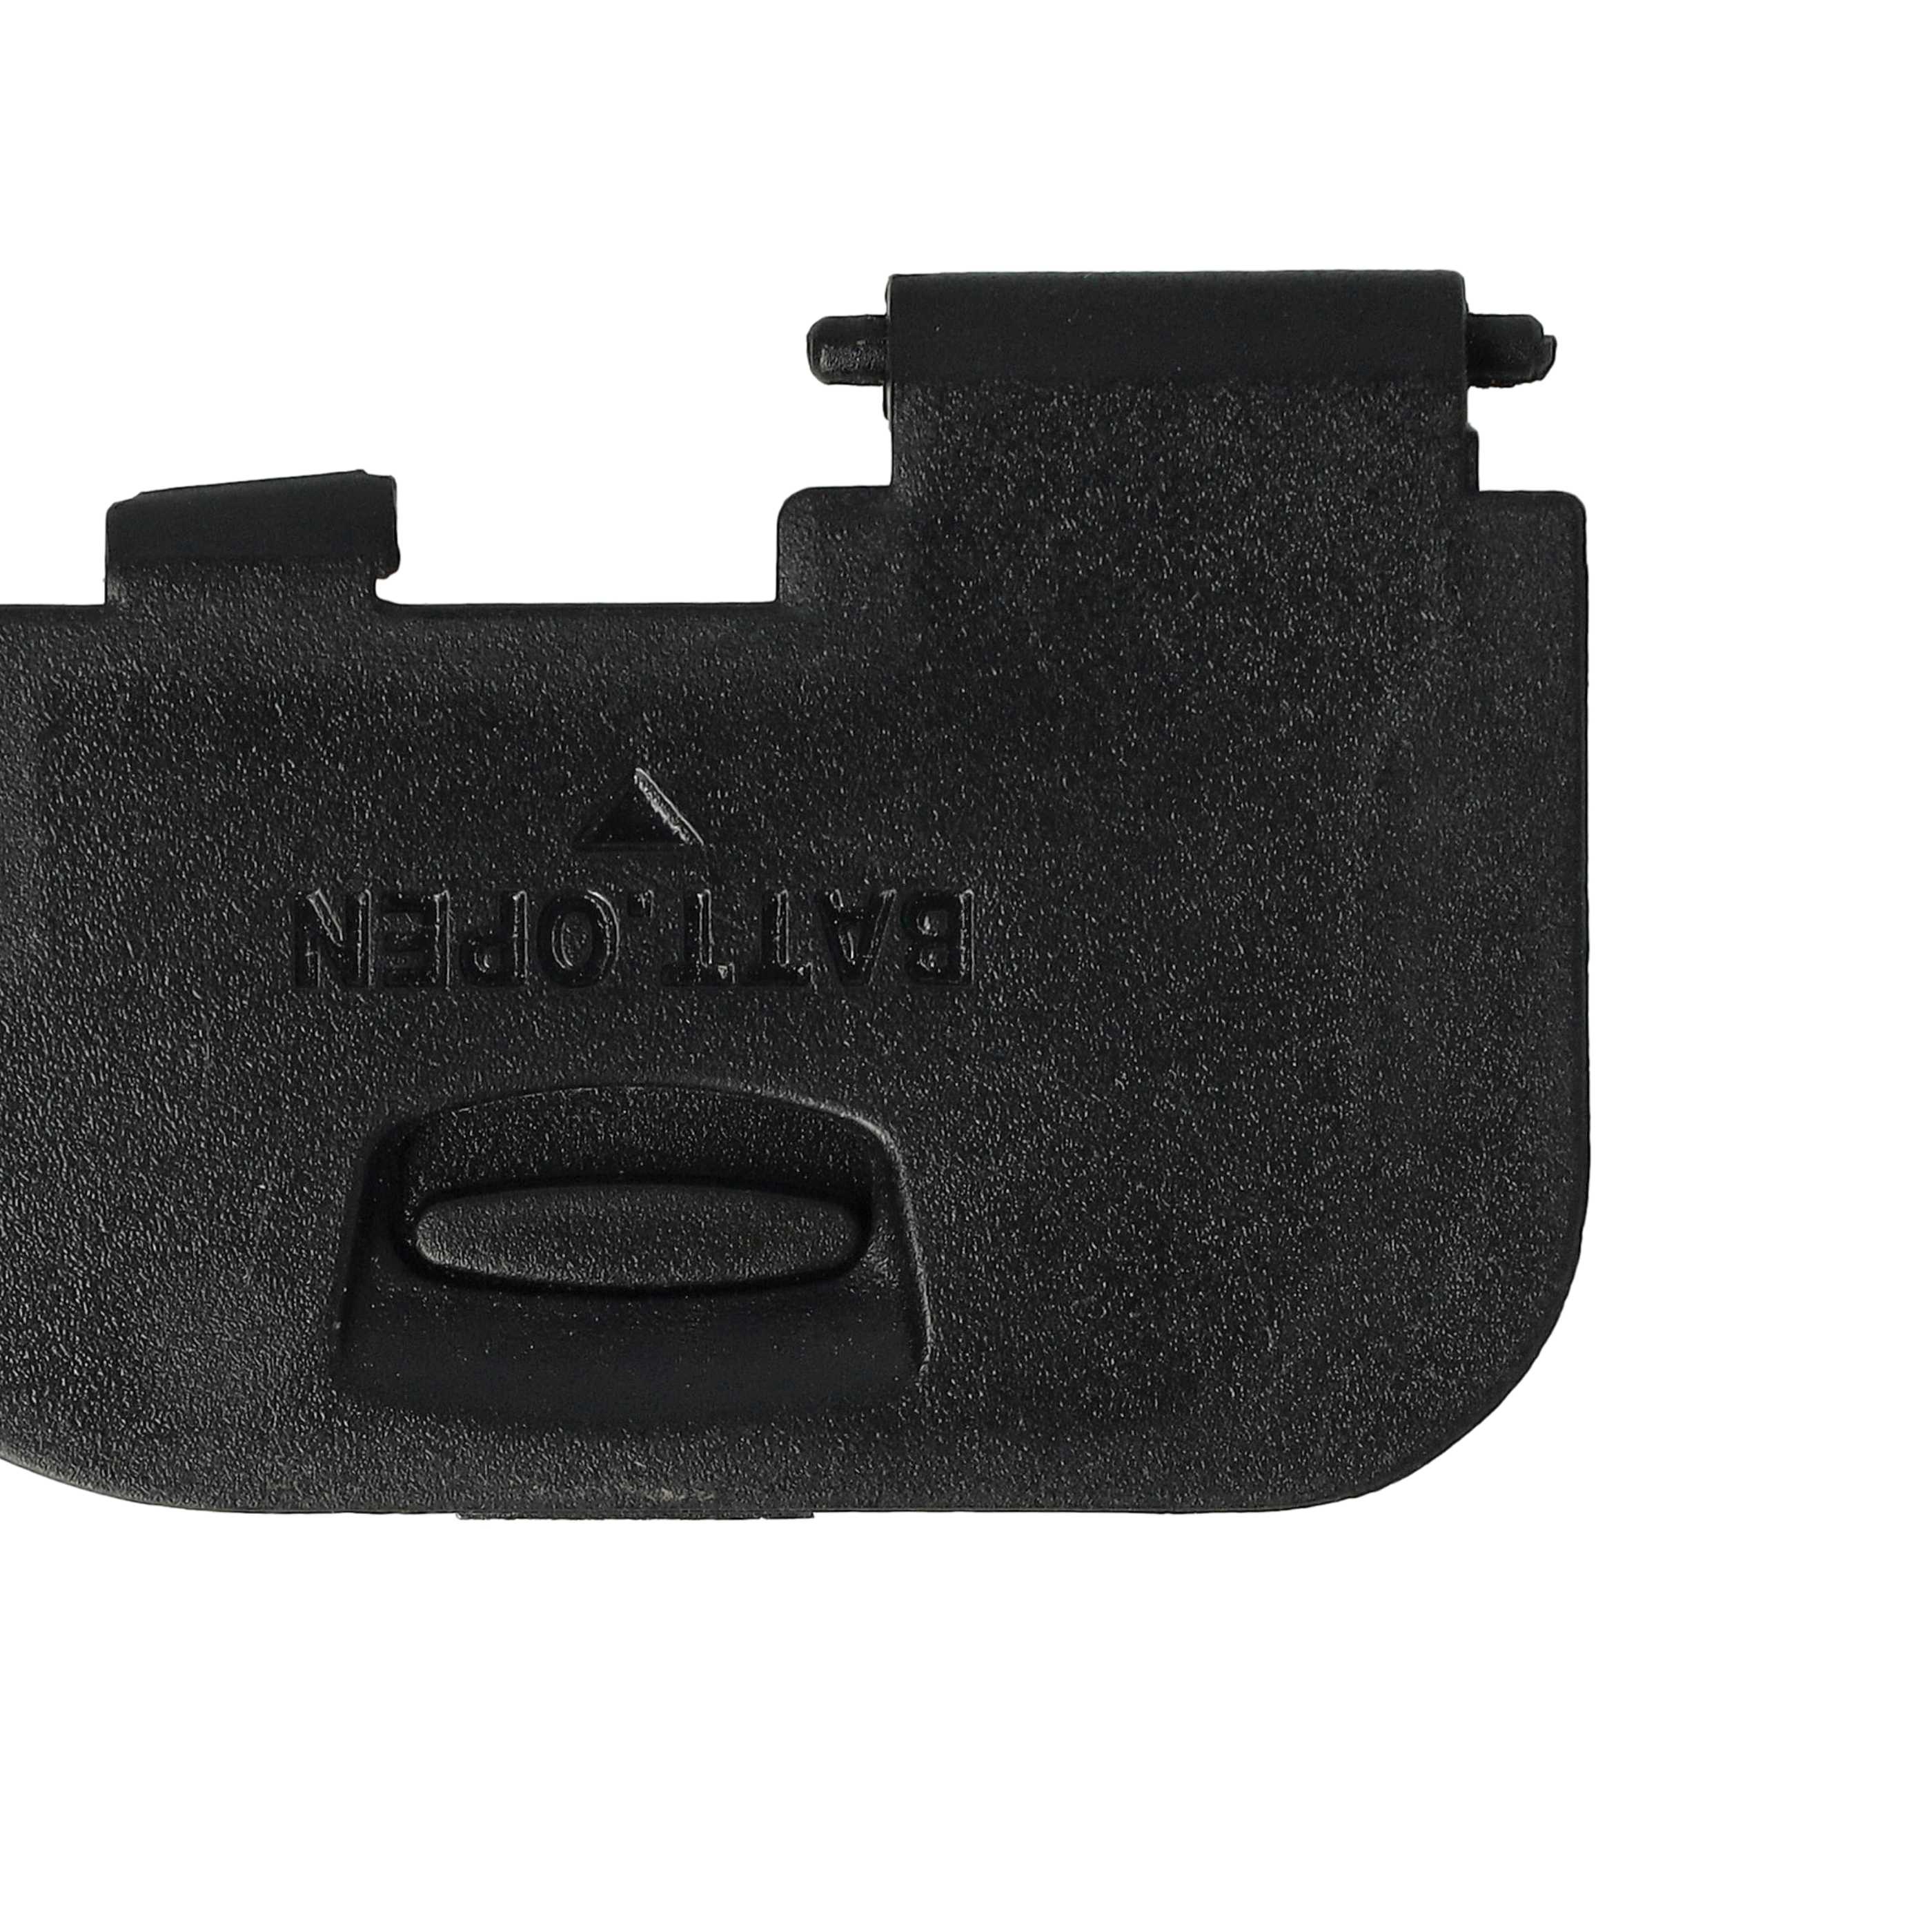 Battery Door Cover suitable for Canon EOS 70D Camera, Battery Grip